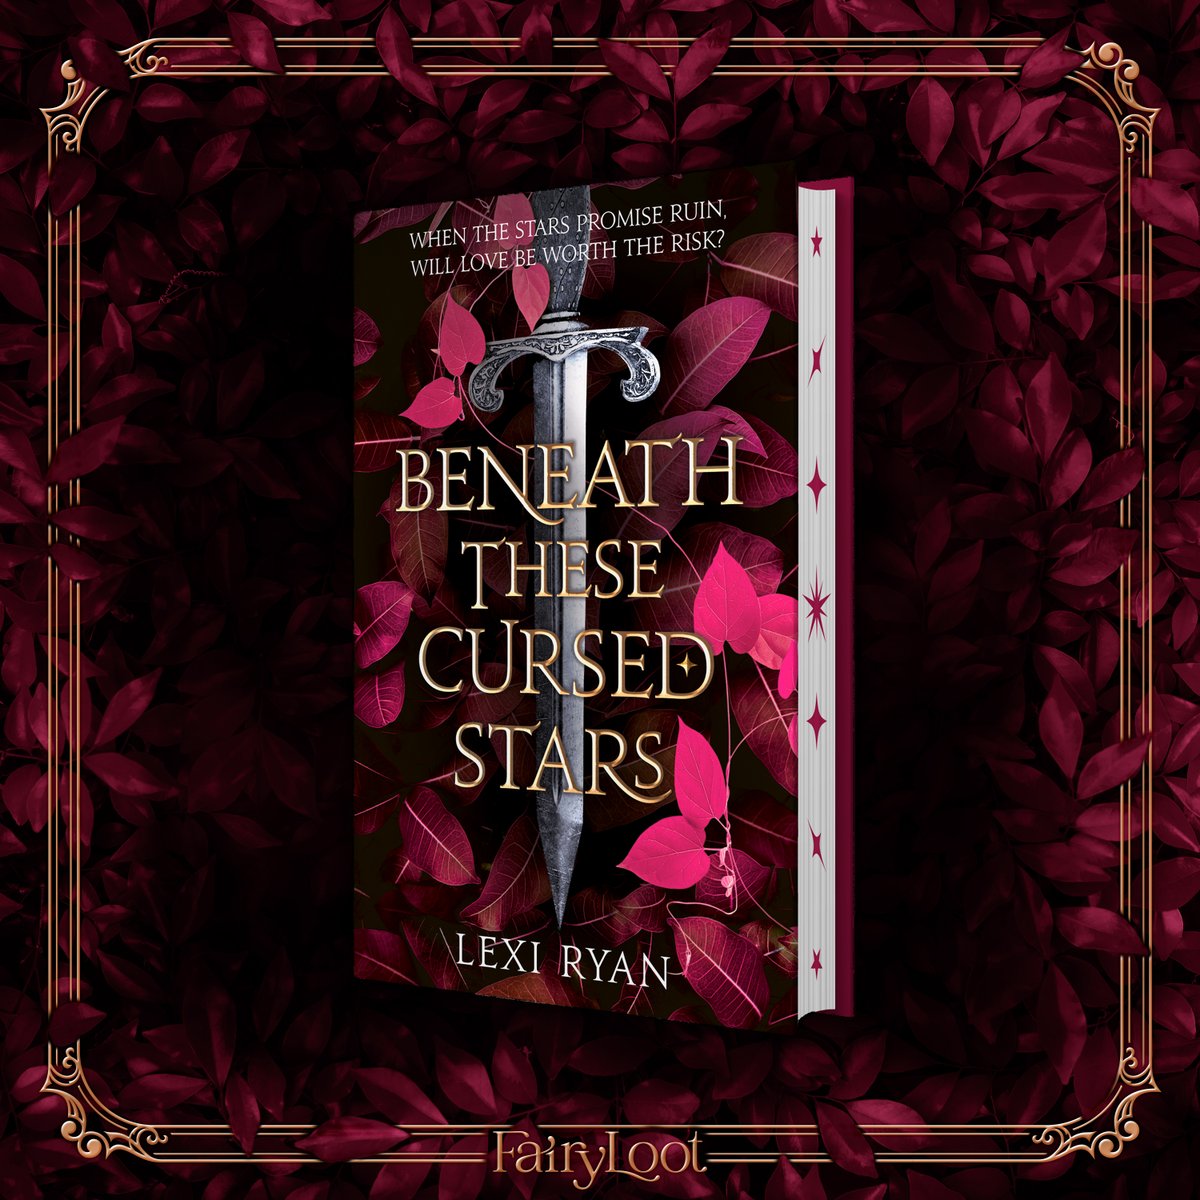 We are so excited to present to you… the ‘Beneath These Cursed Stars’ Exclusive Edition, brought to you in collaboration with @writerlexiryan and @hodderscape!